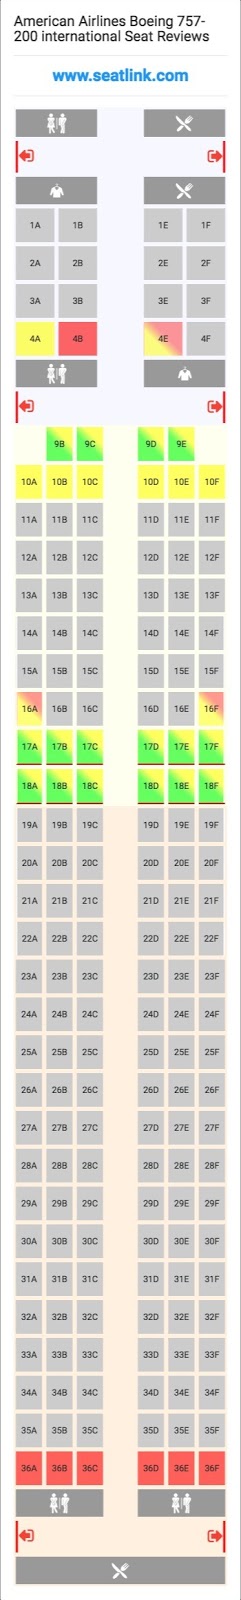 Boeing 737 800 Jet Seating Chart American Airlines